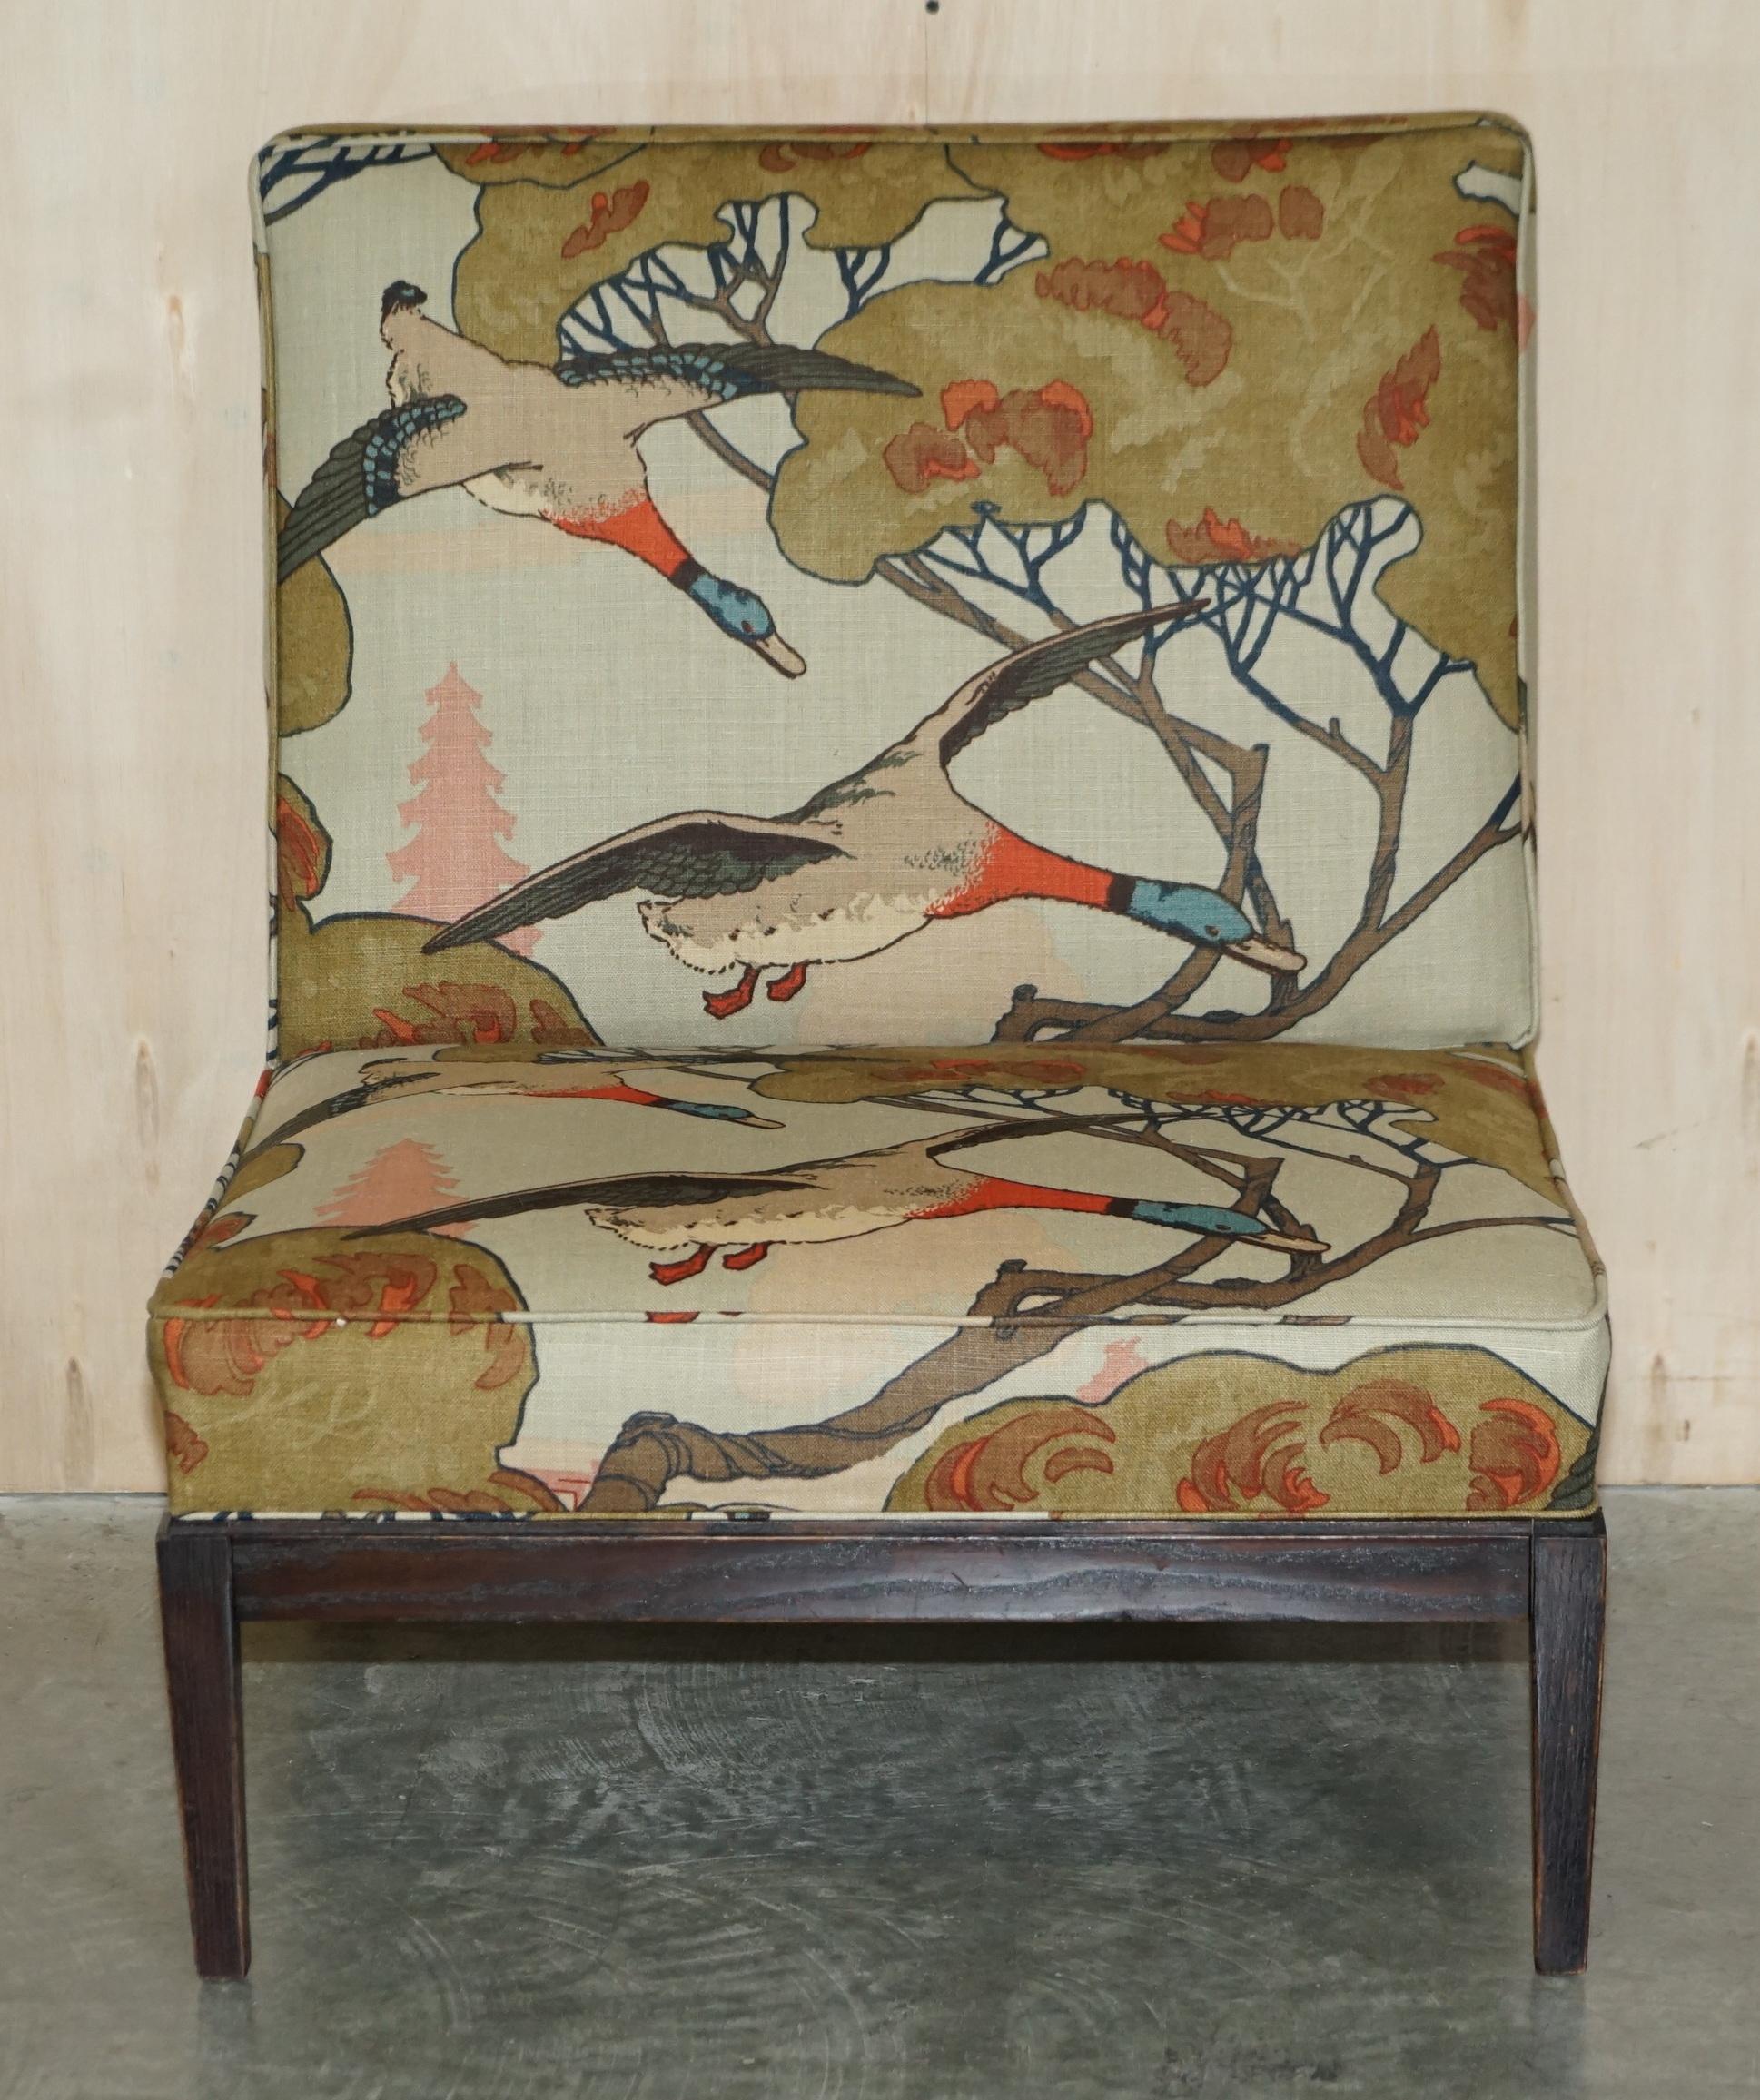 We are delighted to offer for sale this fully refurbished, George Smith Norris armchair upholstered in Mulberry Flying Ducks linen which is part of a suite

Condition wise, the suite has been freshly upholstered as mentioned in stunning Mulberry